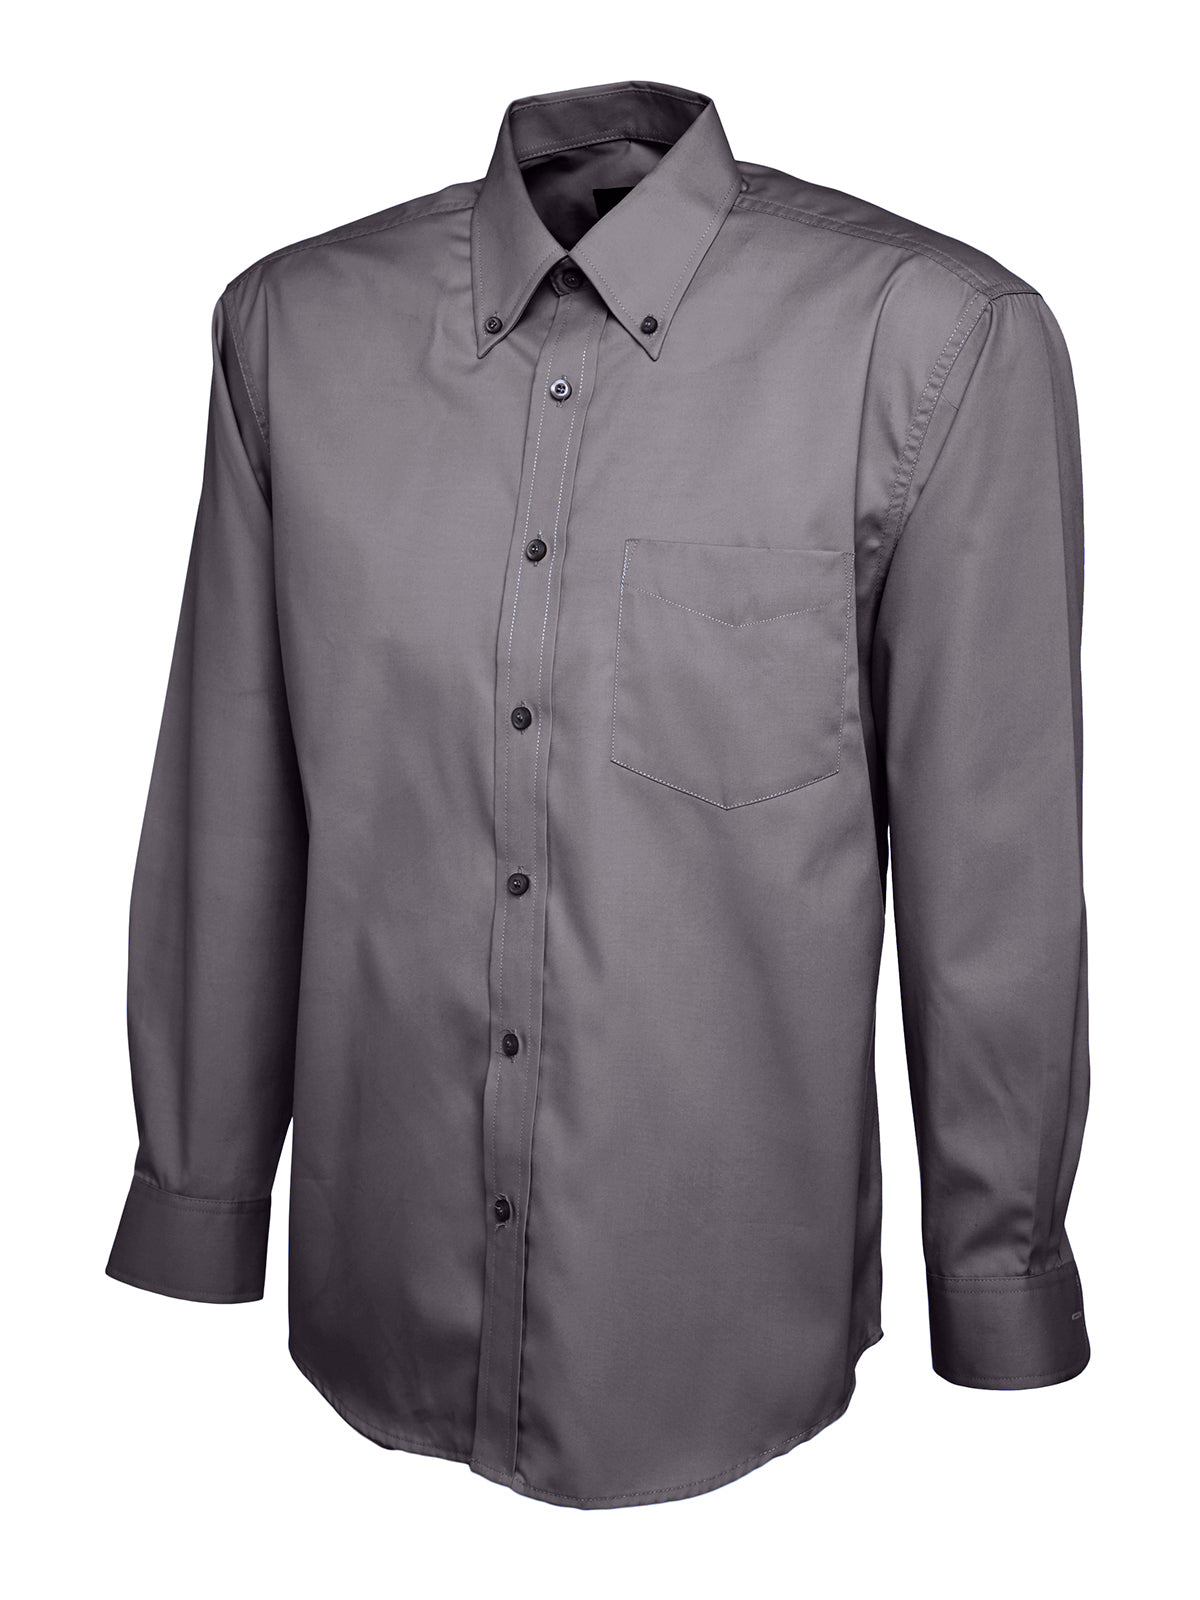 Uneek Mens Pinpoint Oxford Full Sleeve Shirt UC701 - Charcoal